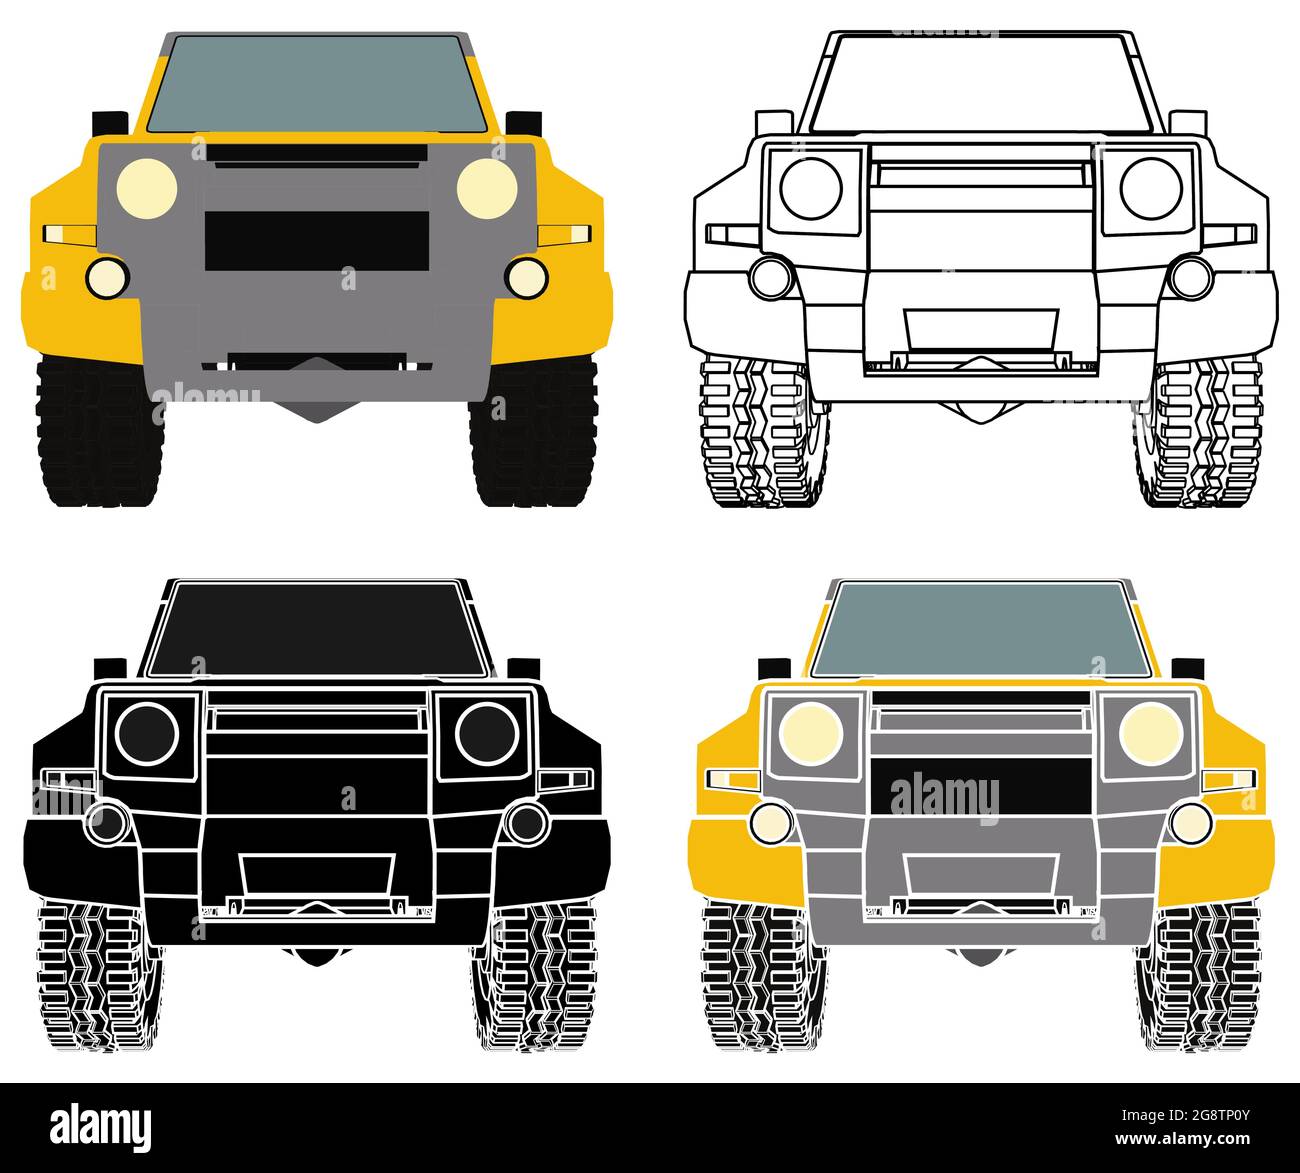 Popular Off-road car 4x4 in perspective view Stock Vector